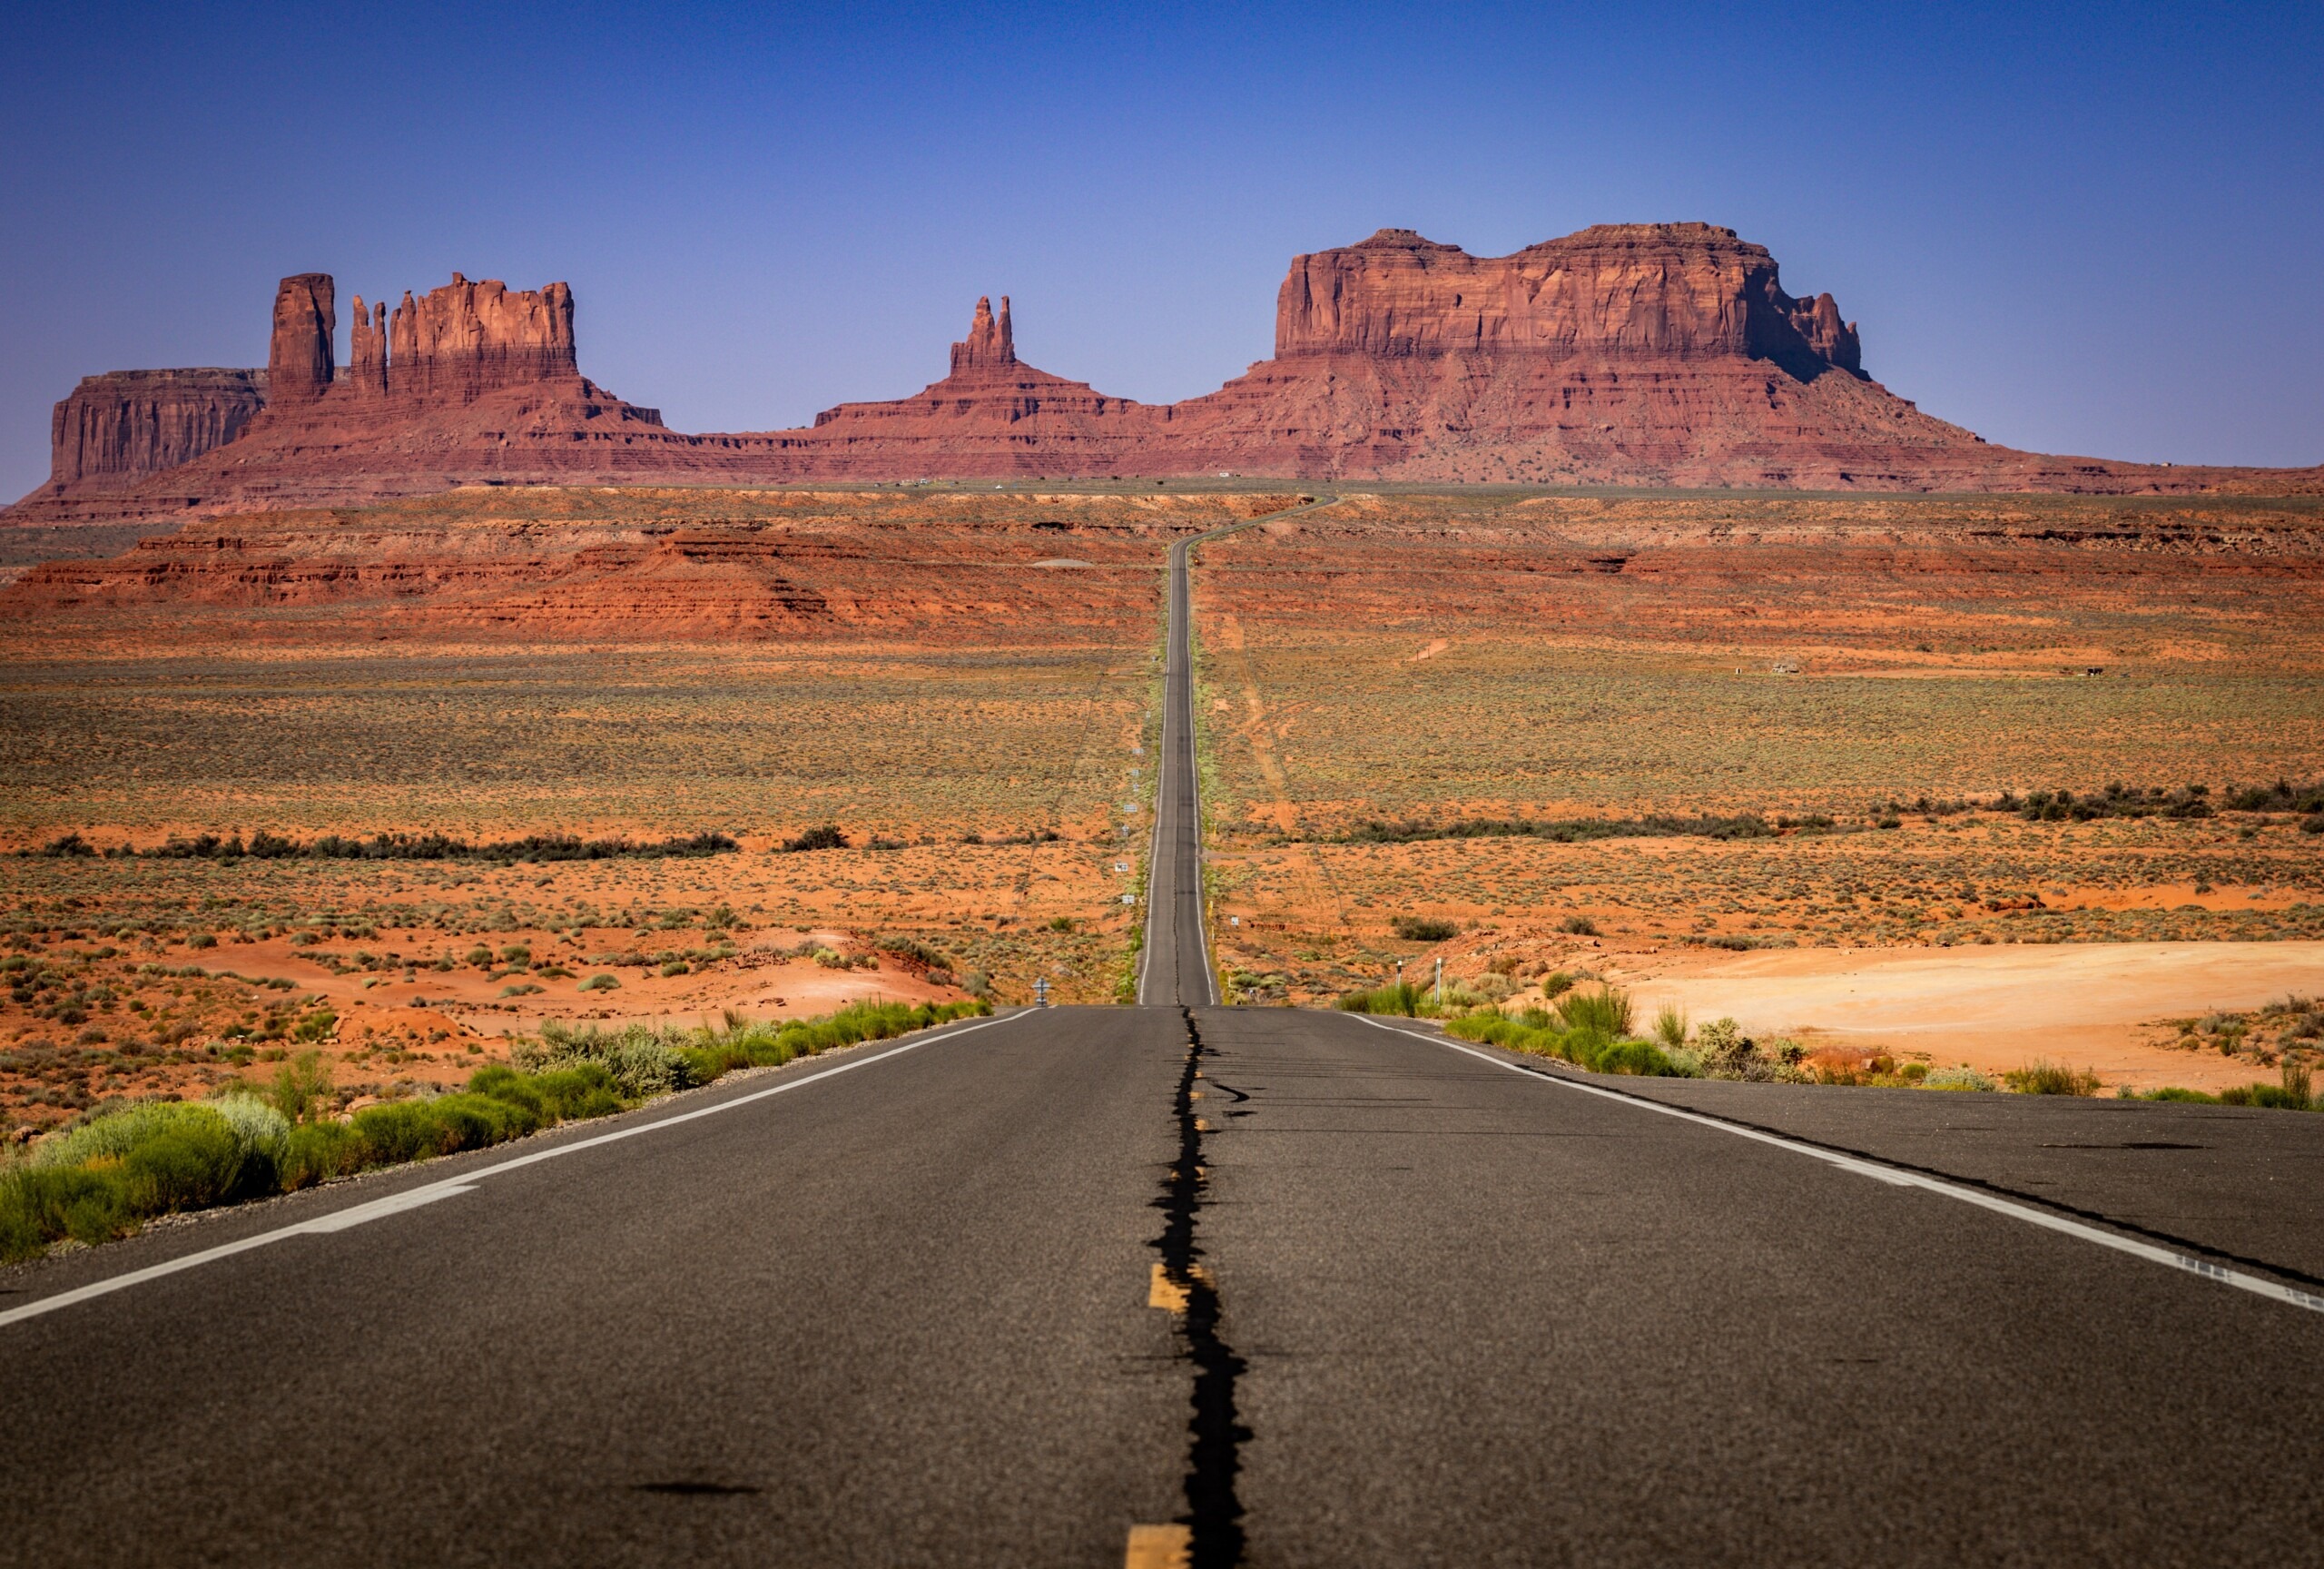 Photo of the road close to Monument Valley which was used in the film Forrest Gump.